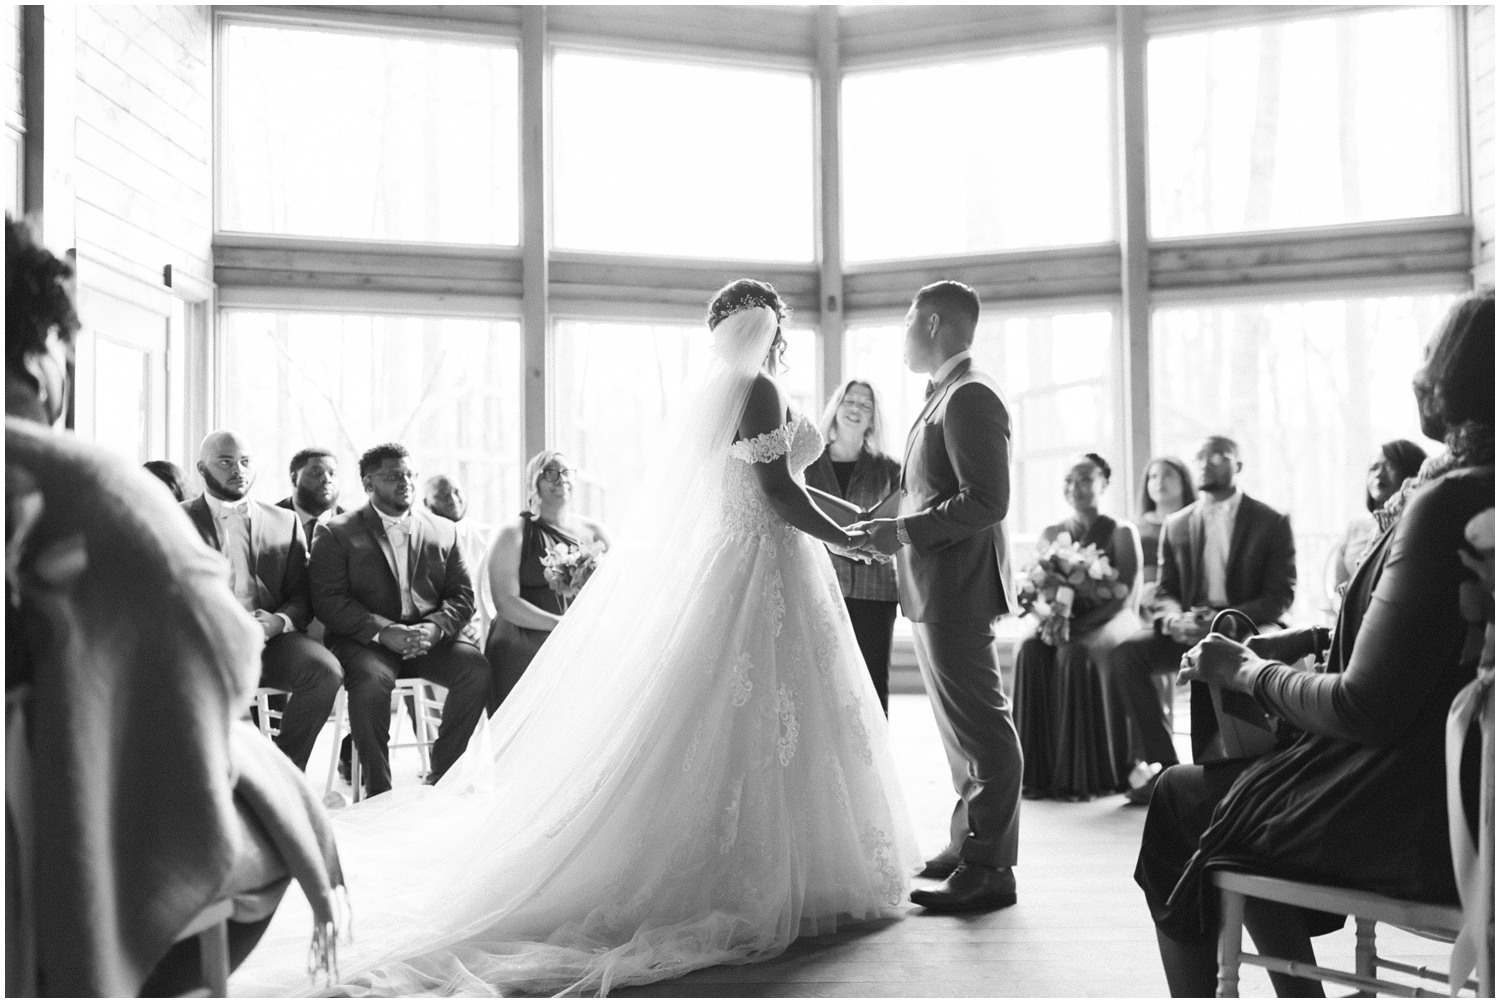 Guests admire couple at their wedding in Raleigh, NC